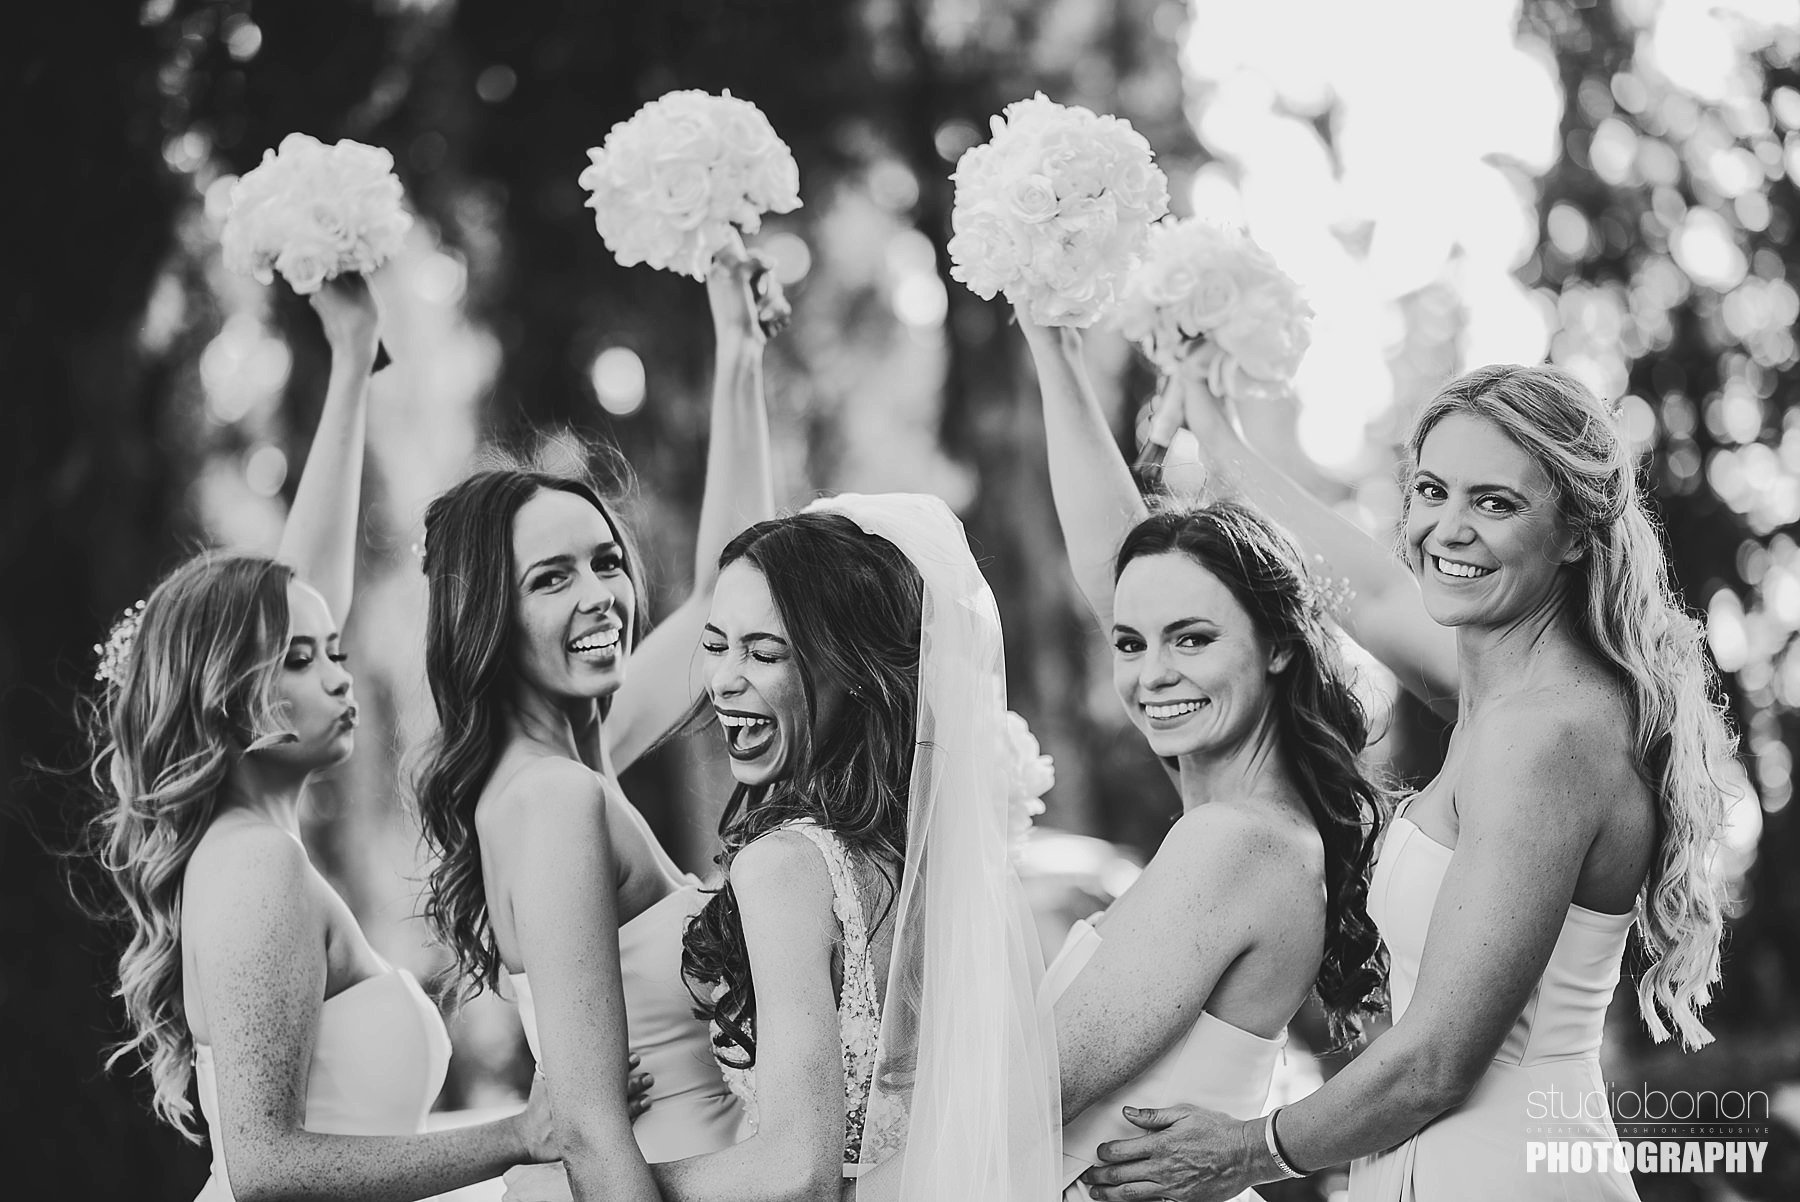 Bride Emily with lovely bridesmaids. Destination wedding in Tuscany countryside near Panzano in Chianti